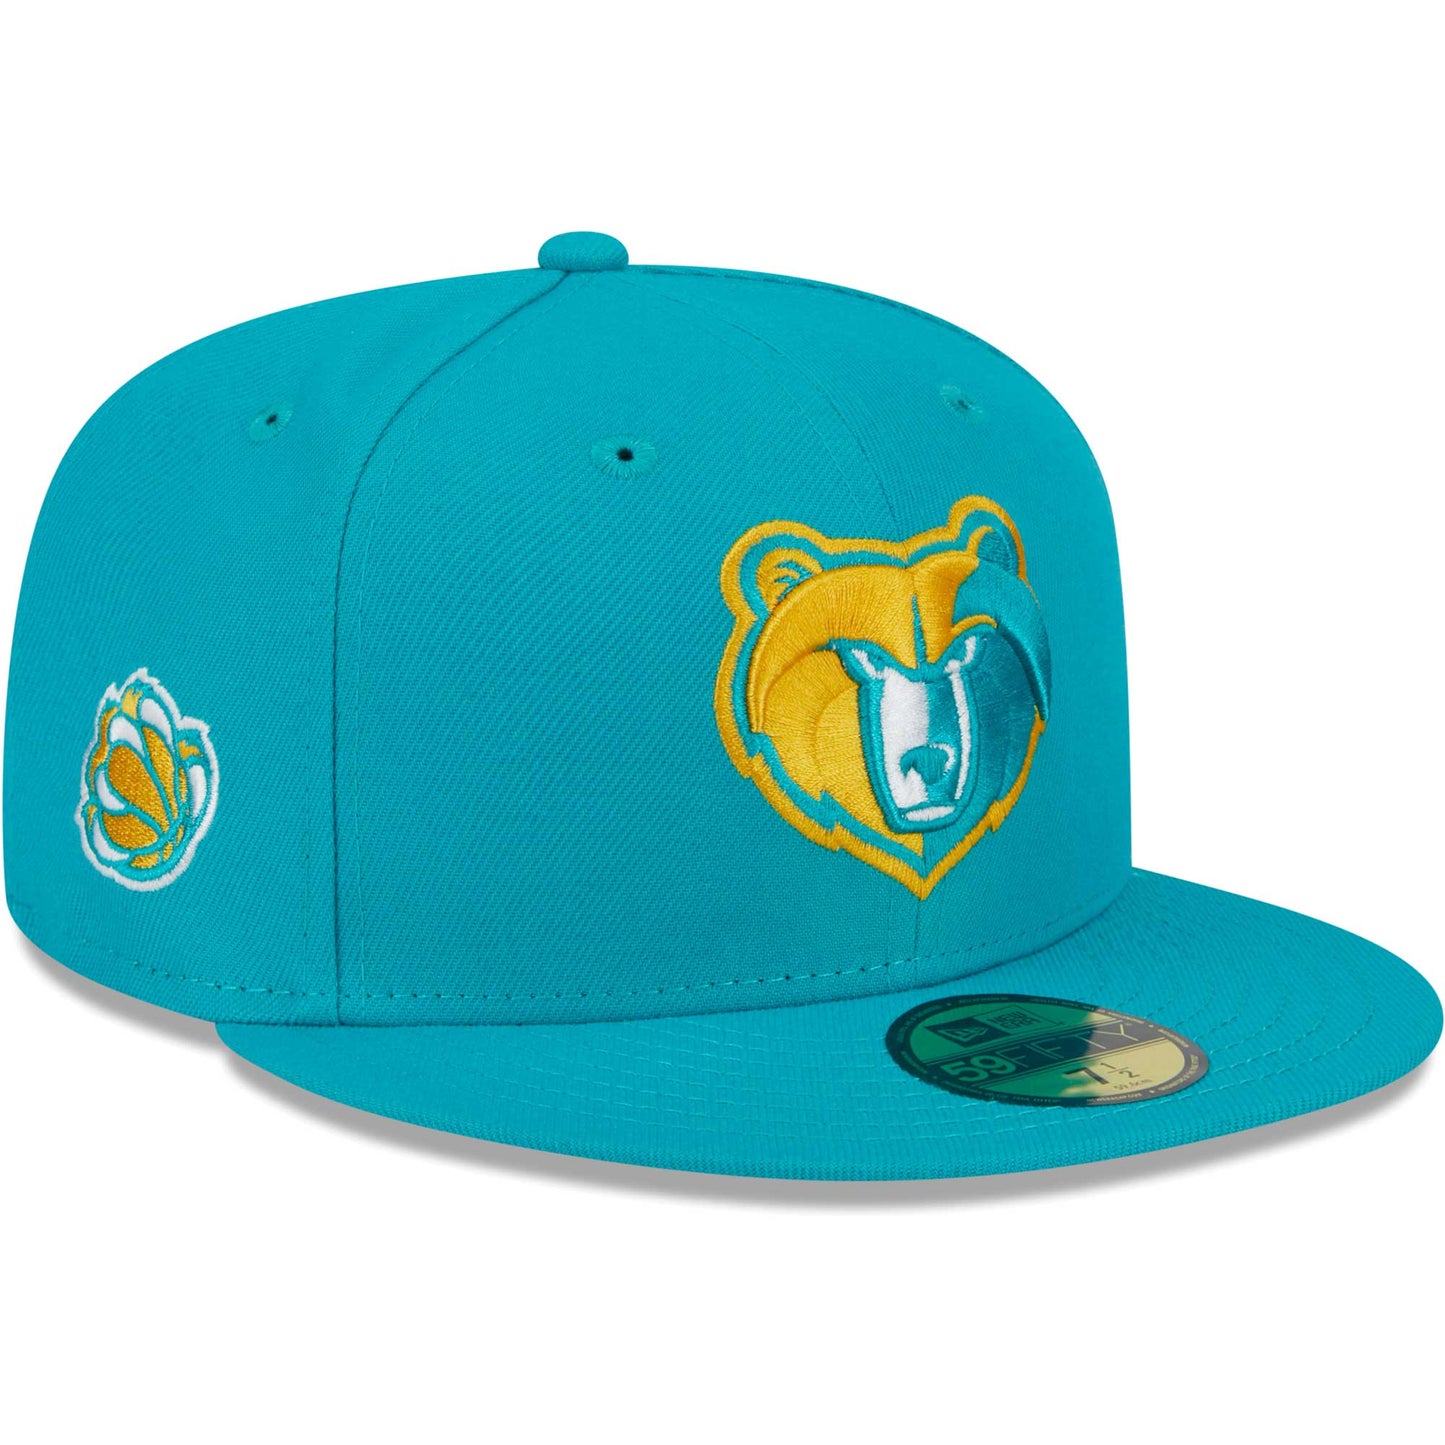 Memphis Grizzlies New Era Breeze Grilled Yellow Undervisor 59FIFTY Fitted Hat - Turquoise